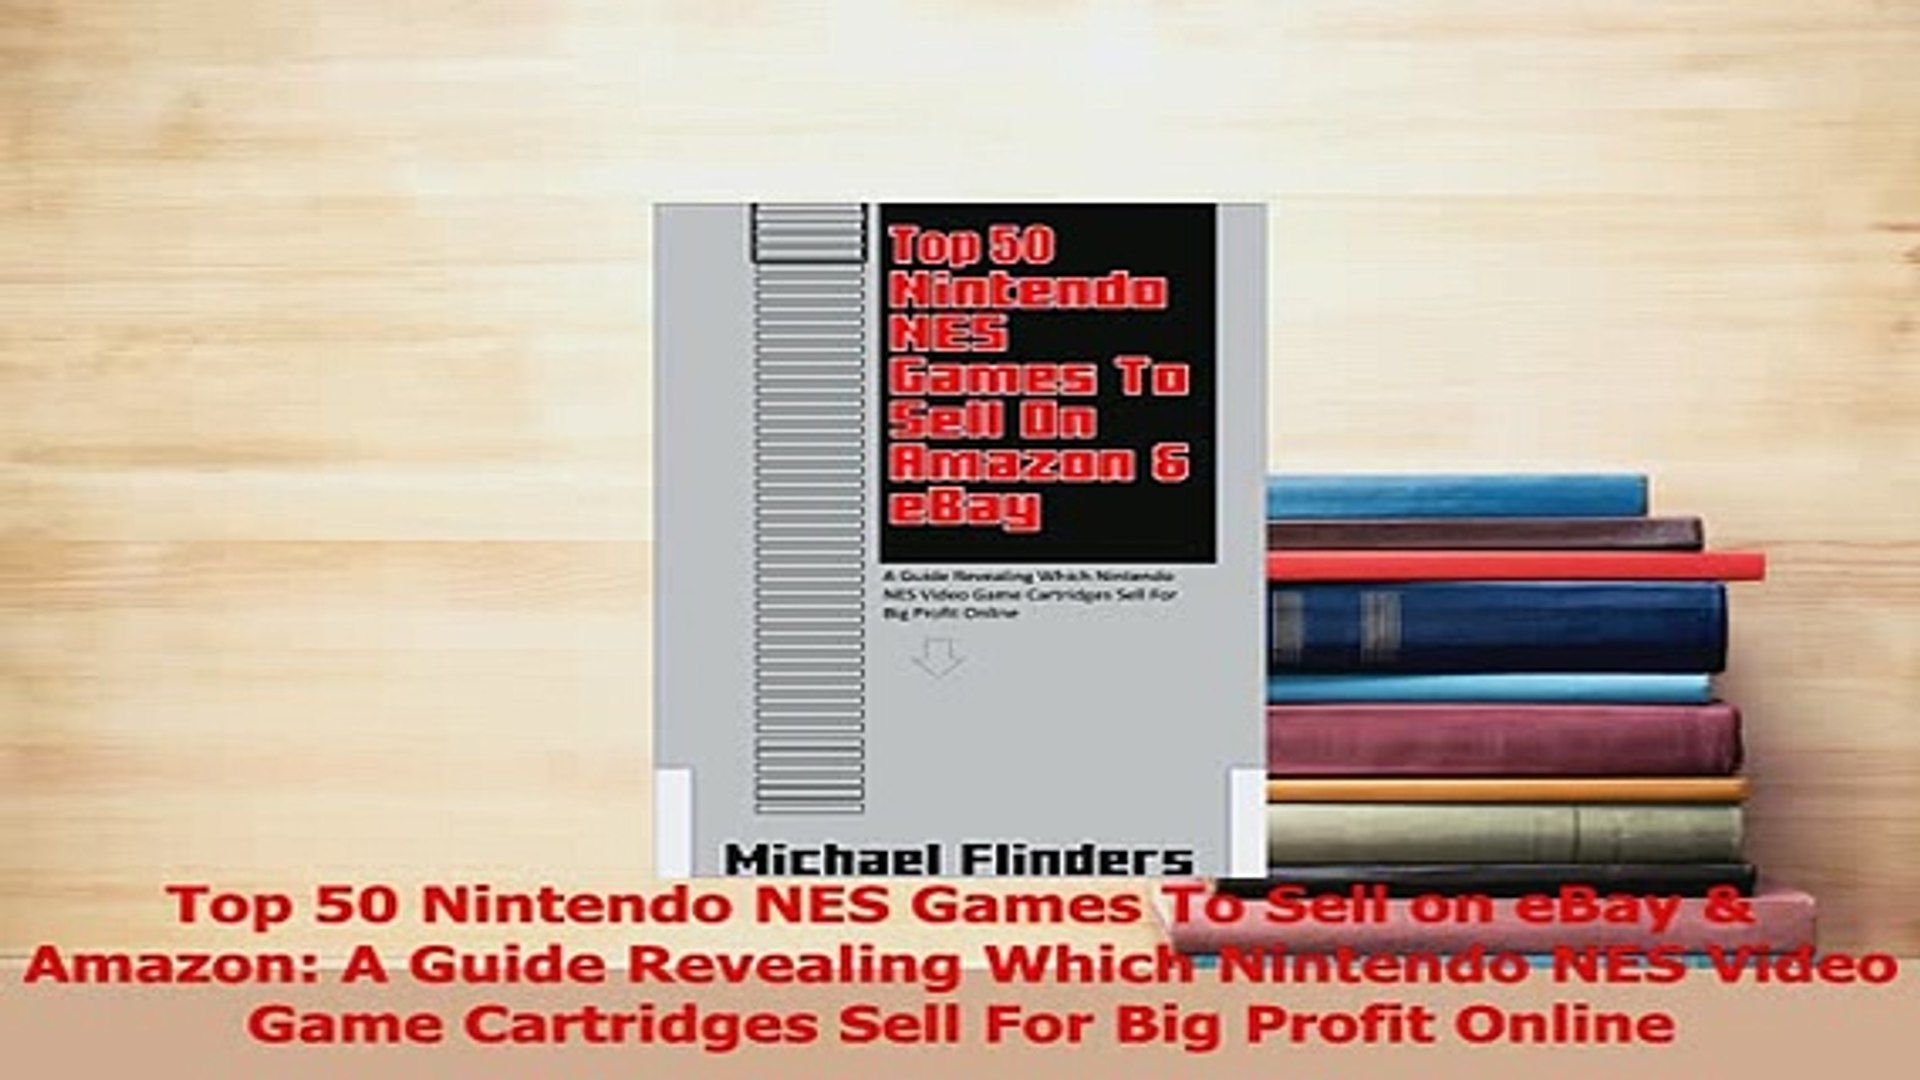 Read Top 50 Nintendo NES Games To Sell on eBay Amazon A Guide Revealing  Which Nintendo NES PDF Online - video Dailymotion